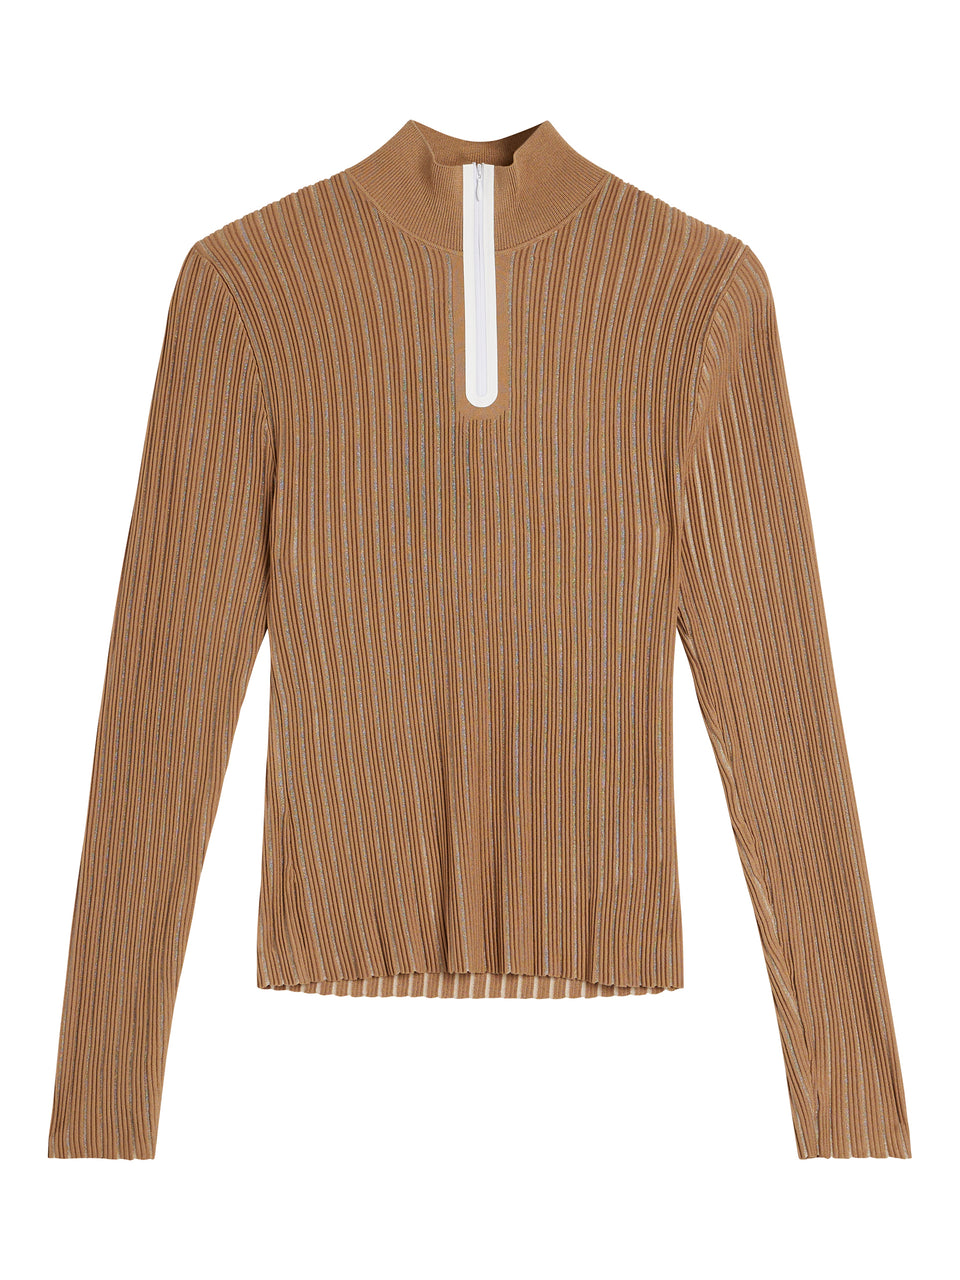 Roxy Knitted Sweater / Tiger Brown